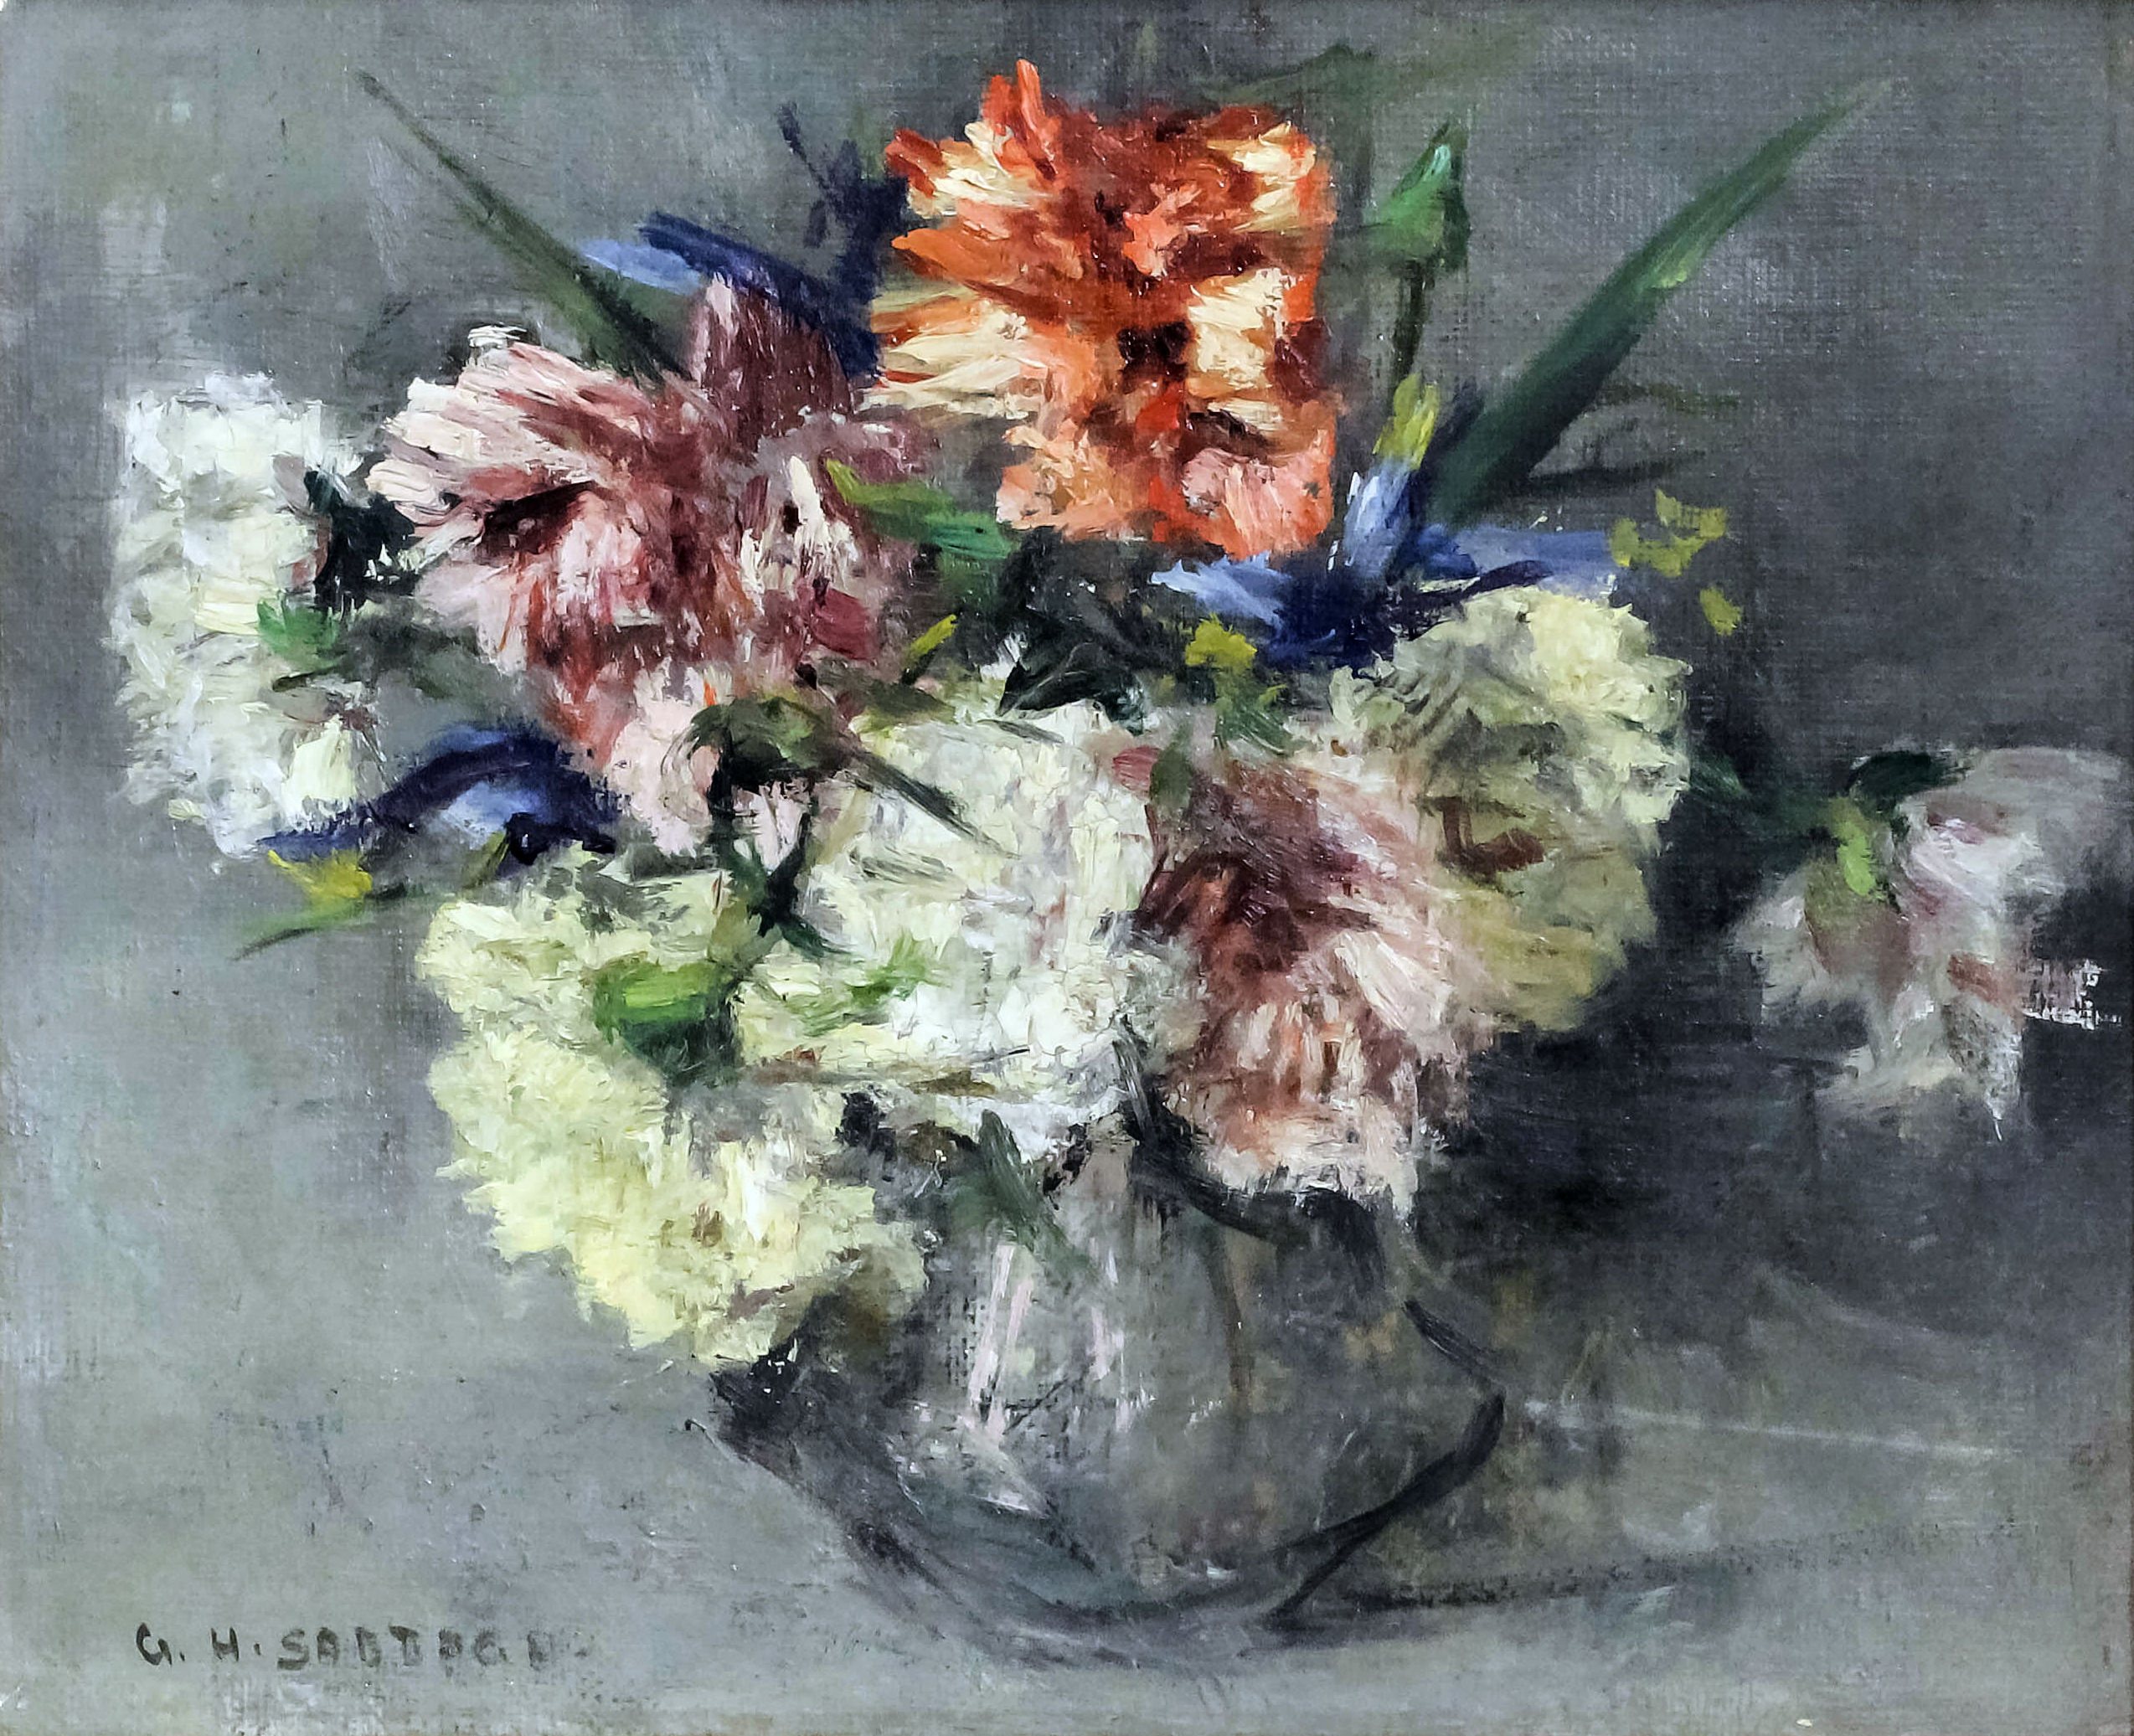 ARR Georges Hanna Sabbagh (1887-1951) - Oil painting - Still life of flowers in a glass vase, canvas